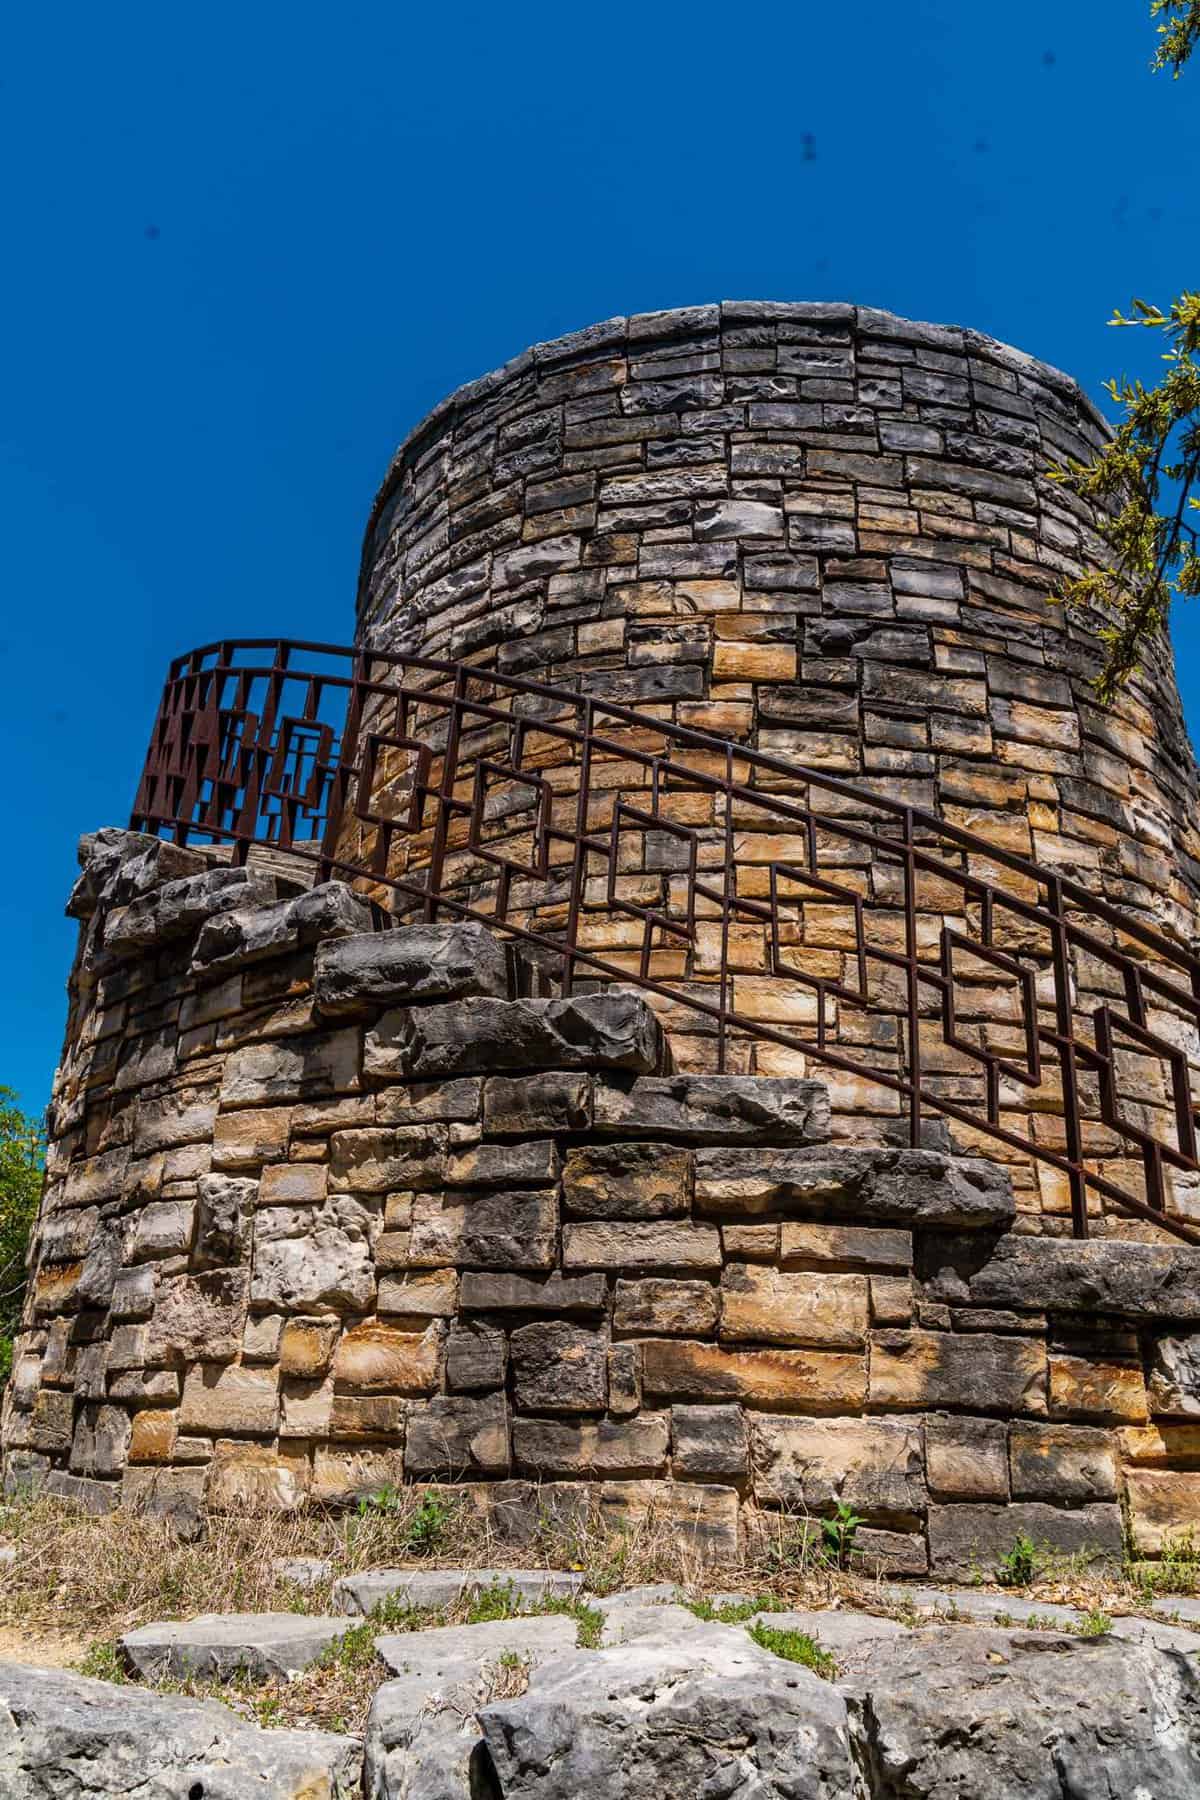 a stone tower with a metal railing